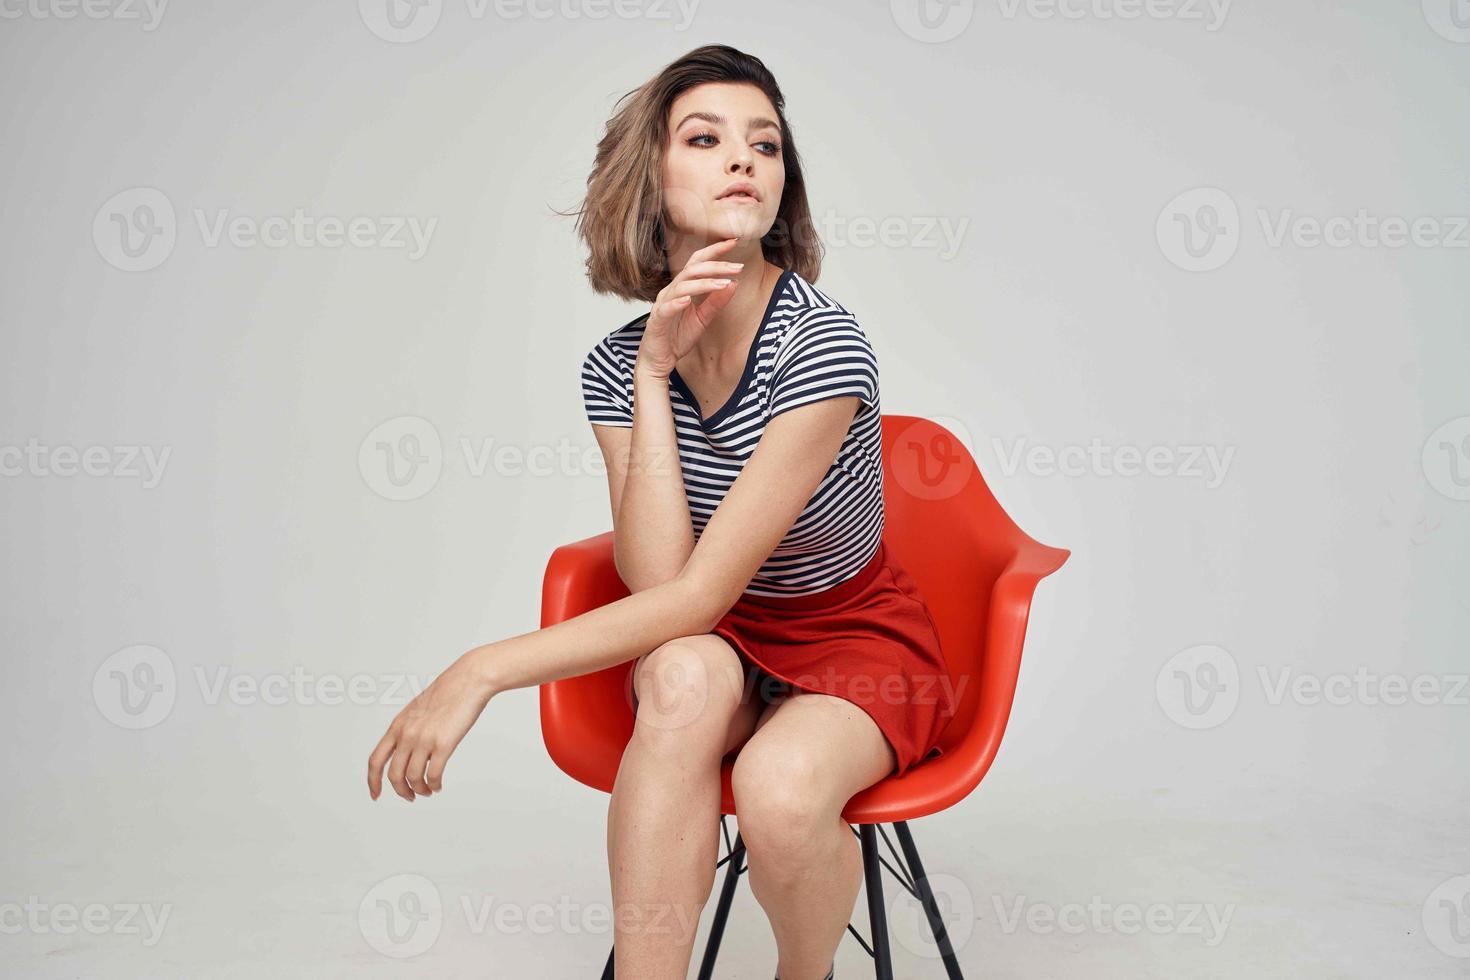 woman with glasses sitting on the red chair light background Lifestyle photo